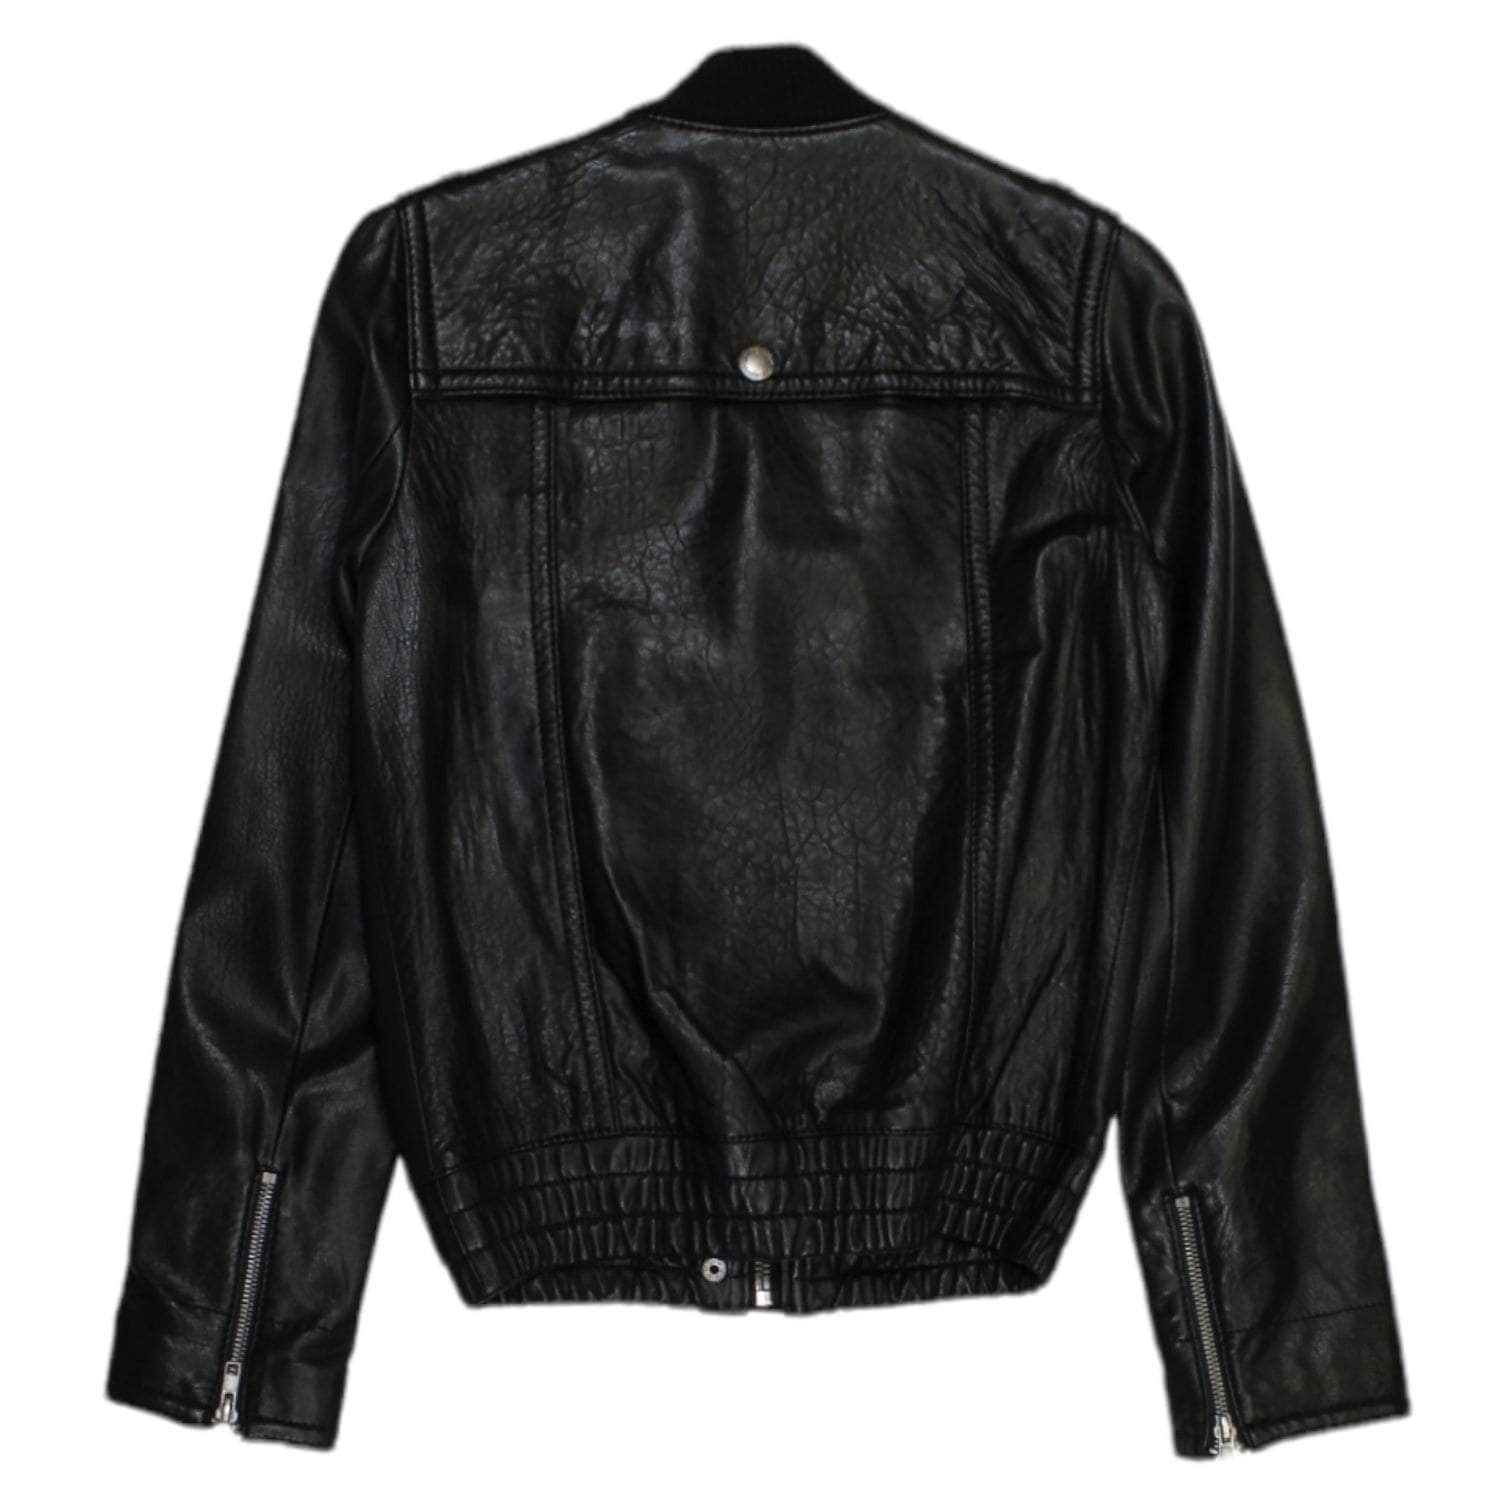 Juicy Couture Black Leather Bomber Jacket